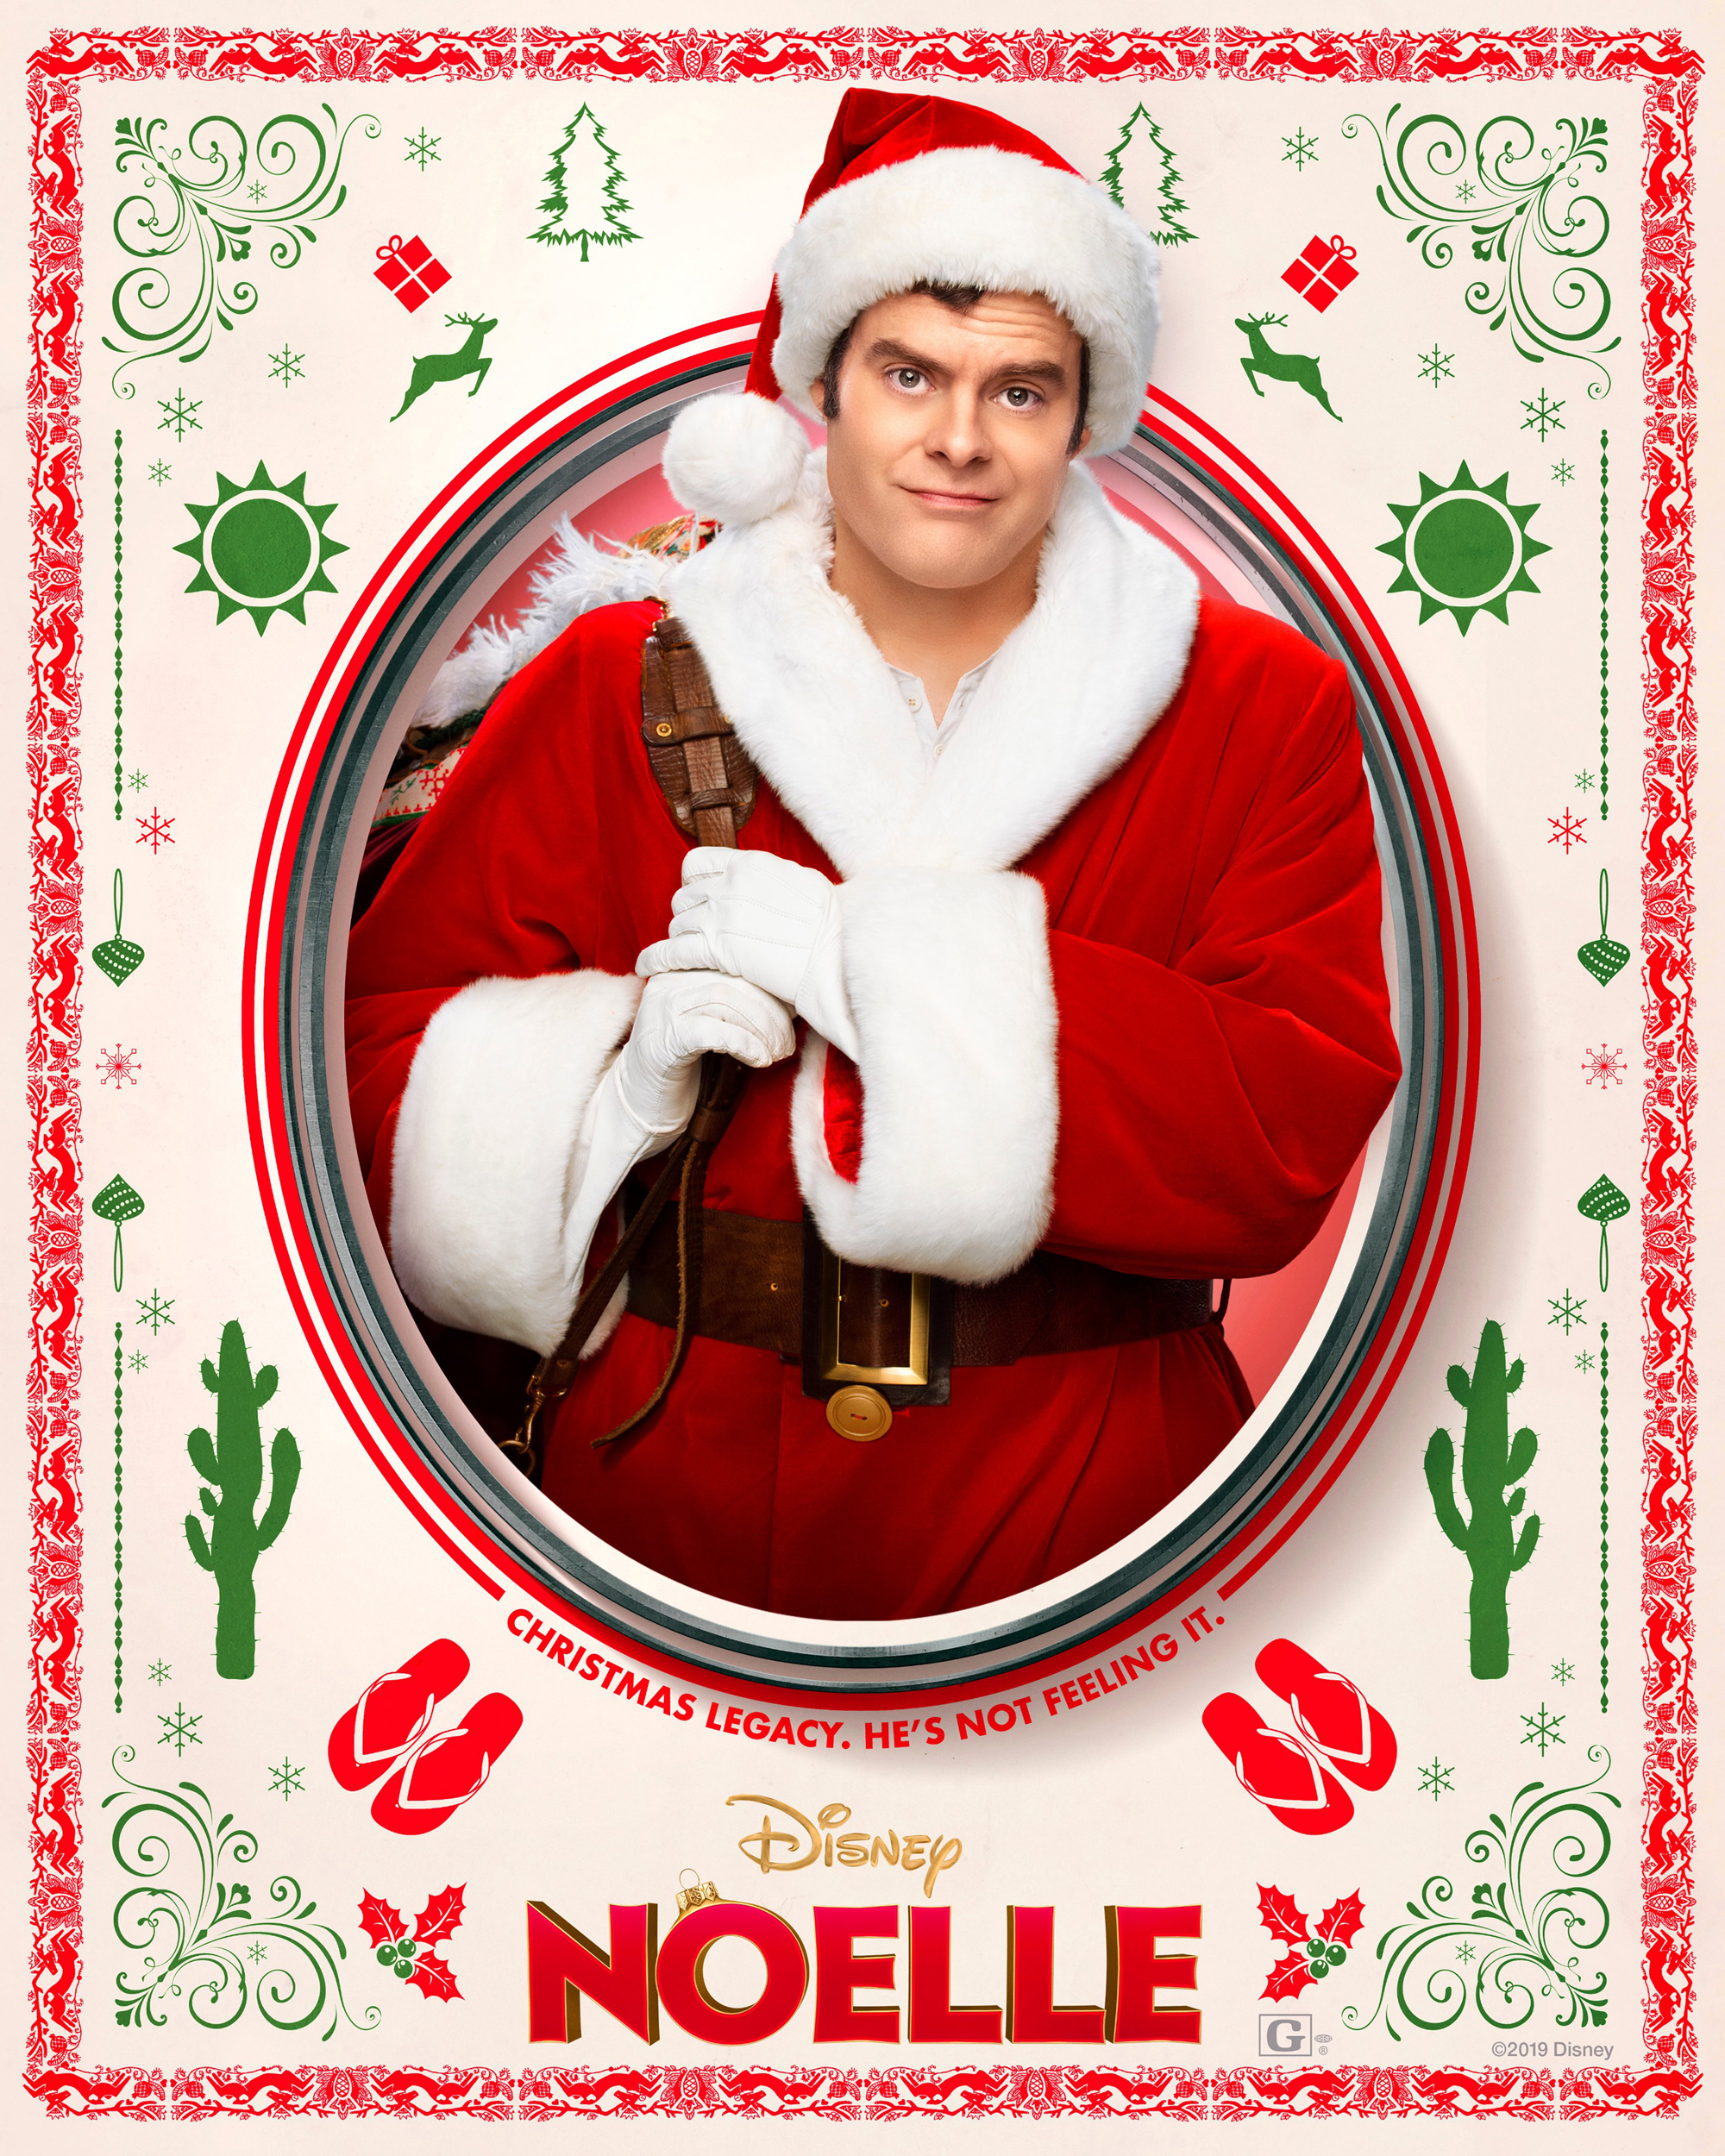 Noelle (2019) Character Poster - Bill Hader as Nick Kringle